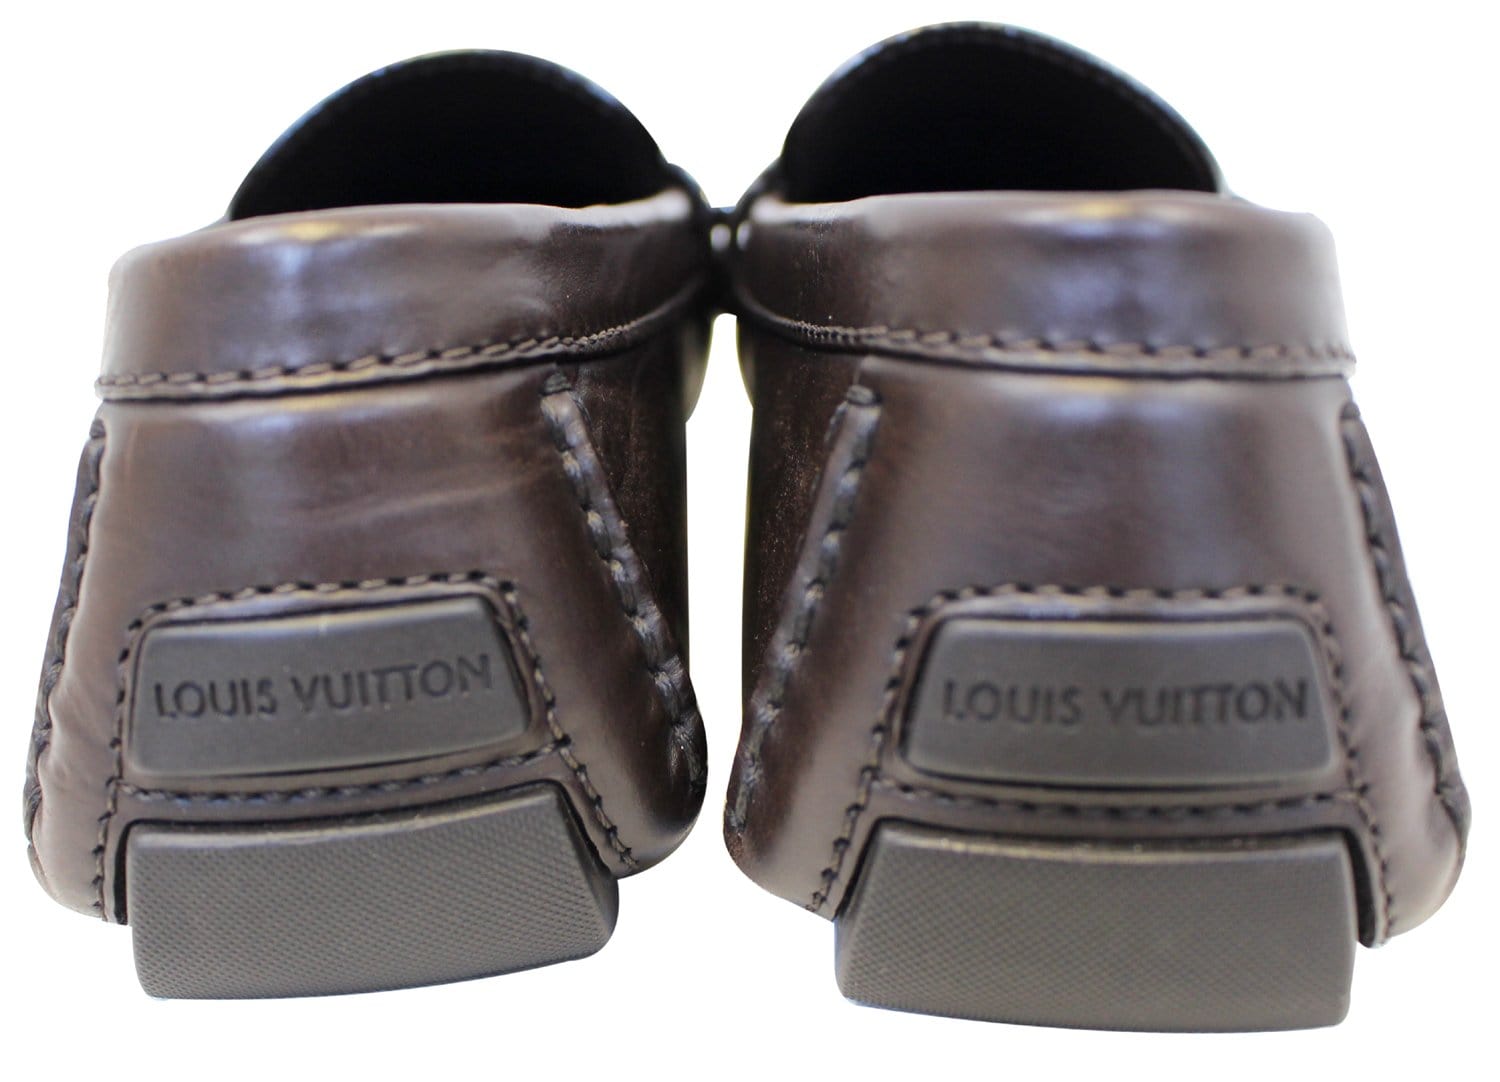 LOUIS VUITTON Major Loafer Brown. Size 9